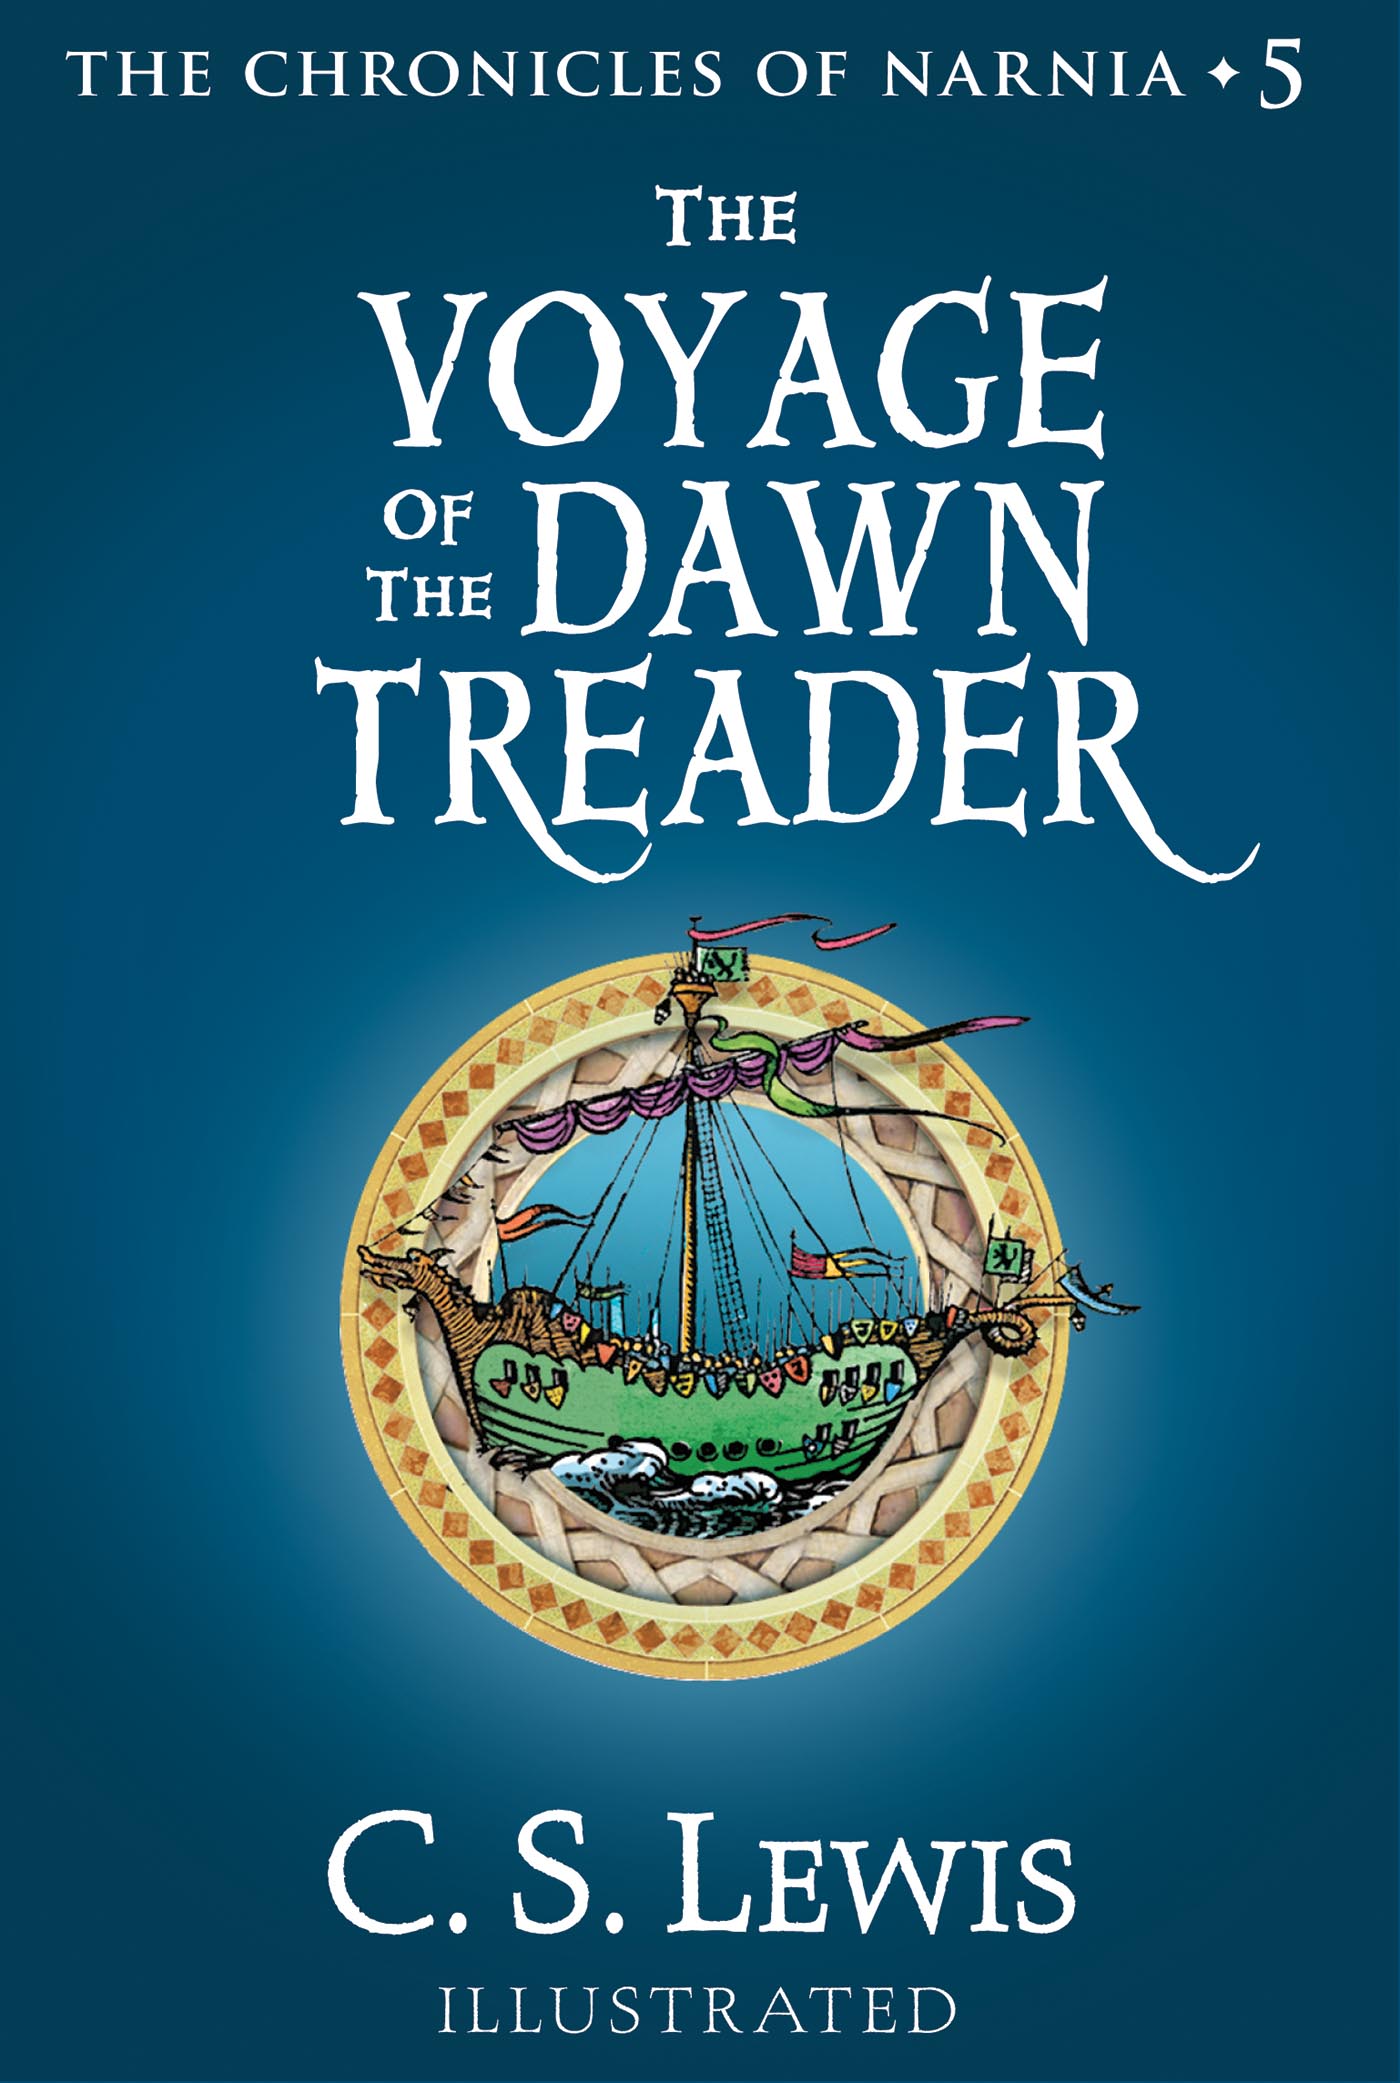 voyage of the dawn treader full text